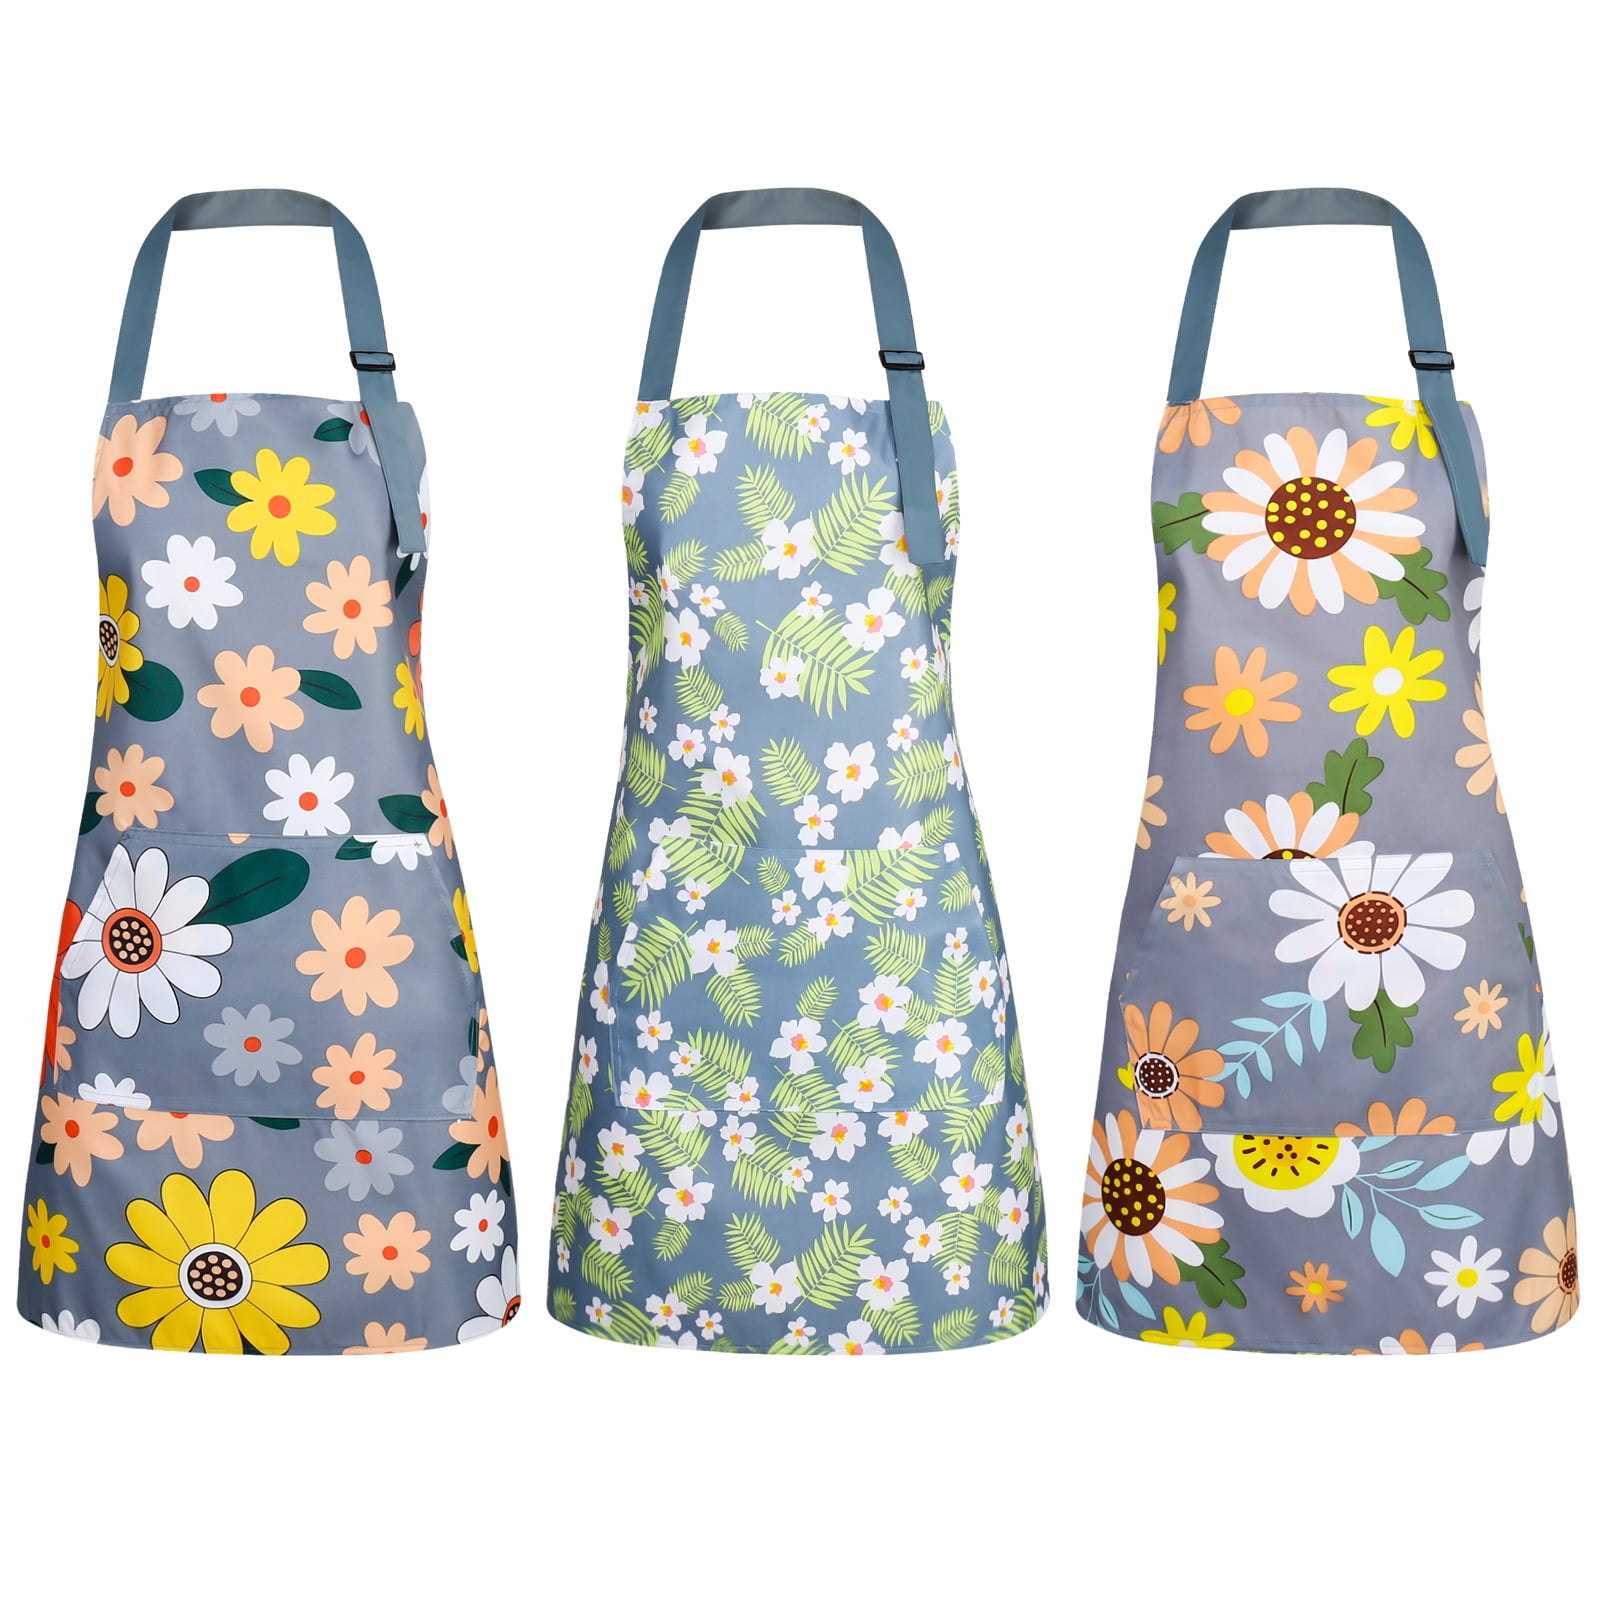 HEQUSIGNS 3 Pack Floral Aprons, Adjustable Waterproof Sunflower Chef ...